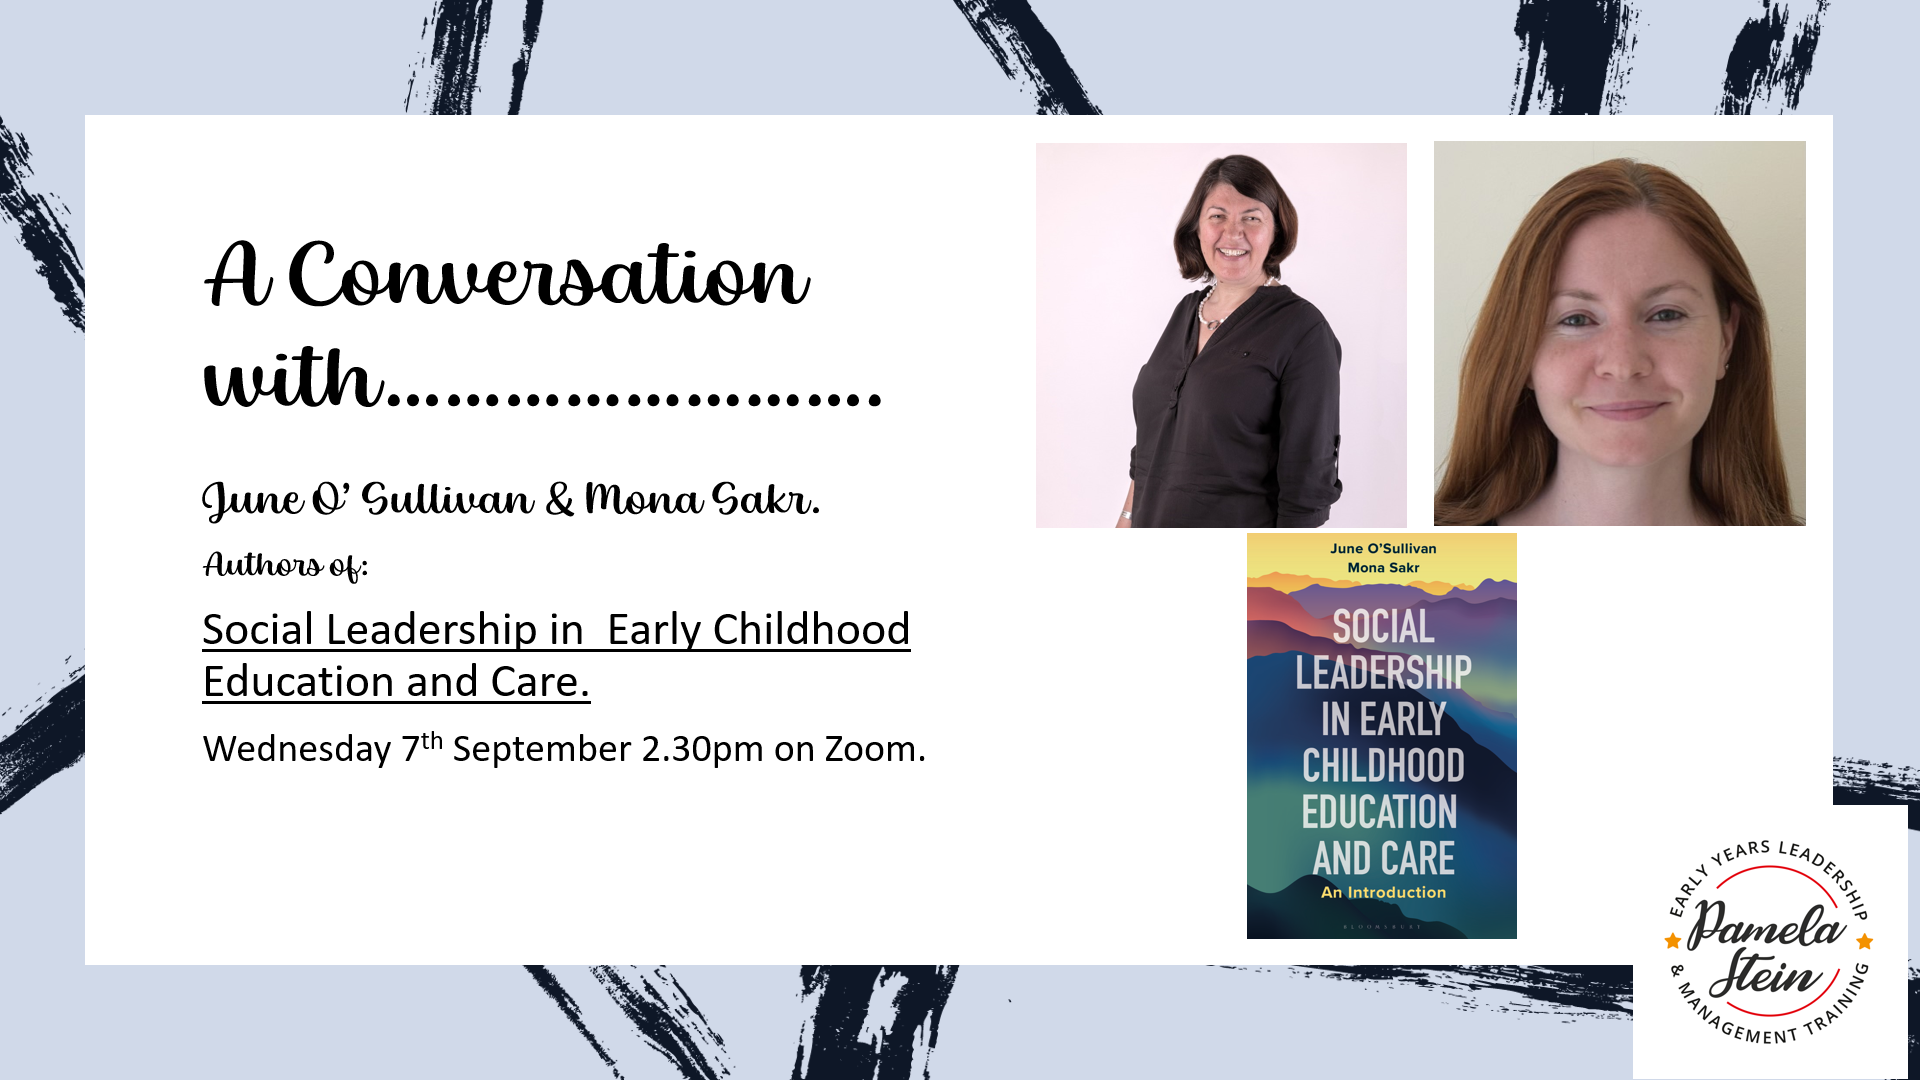 A Conversation with....... June O' Sullivan & Mona Sakr. Social Leadership in Early Childhood Education and Care.